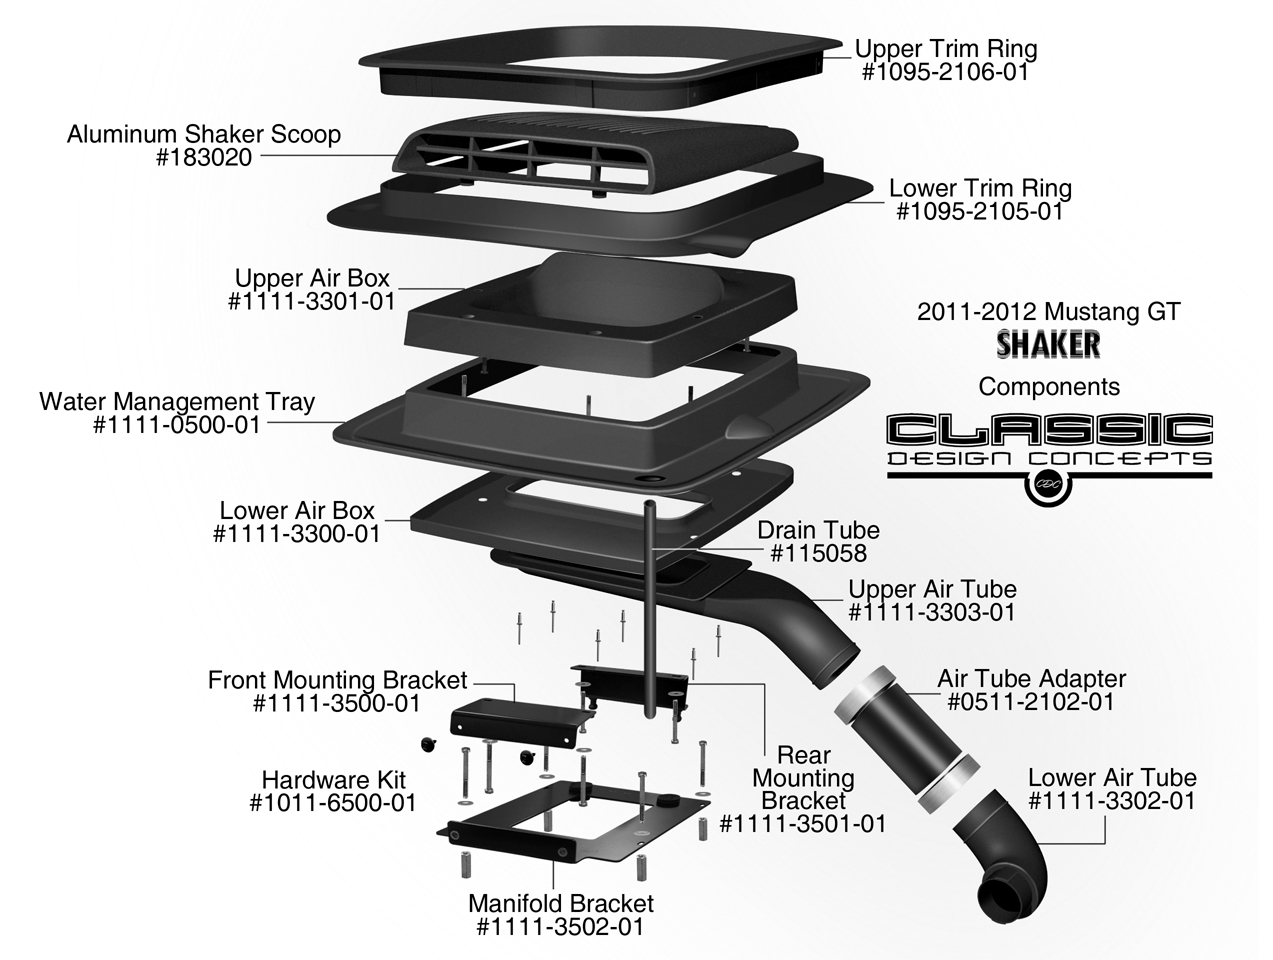 2010-14-shaker-exploded-view-b-w-components.jpg